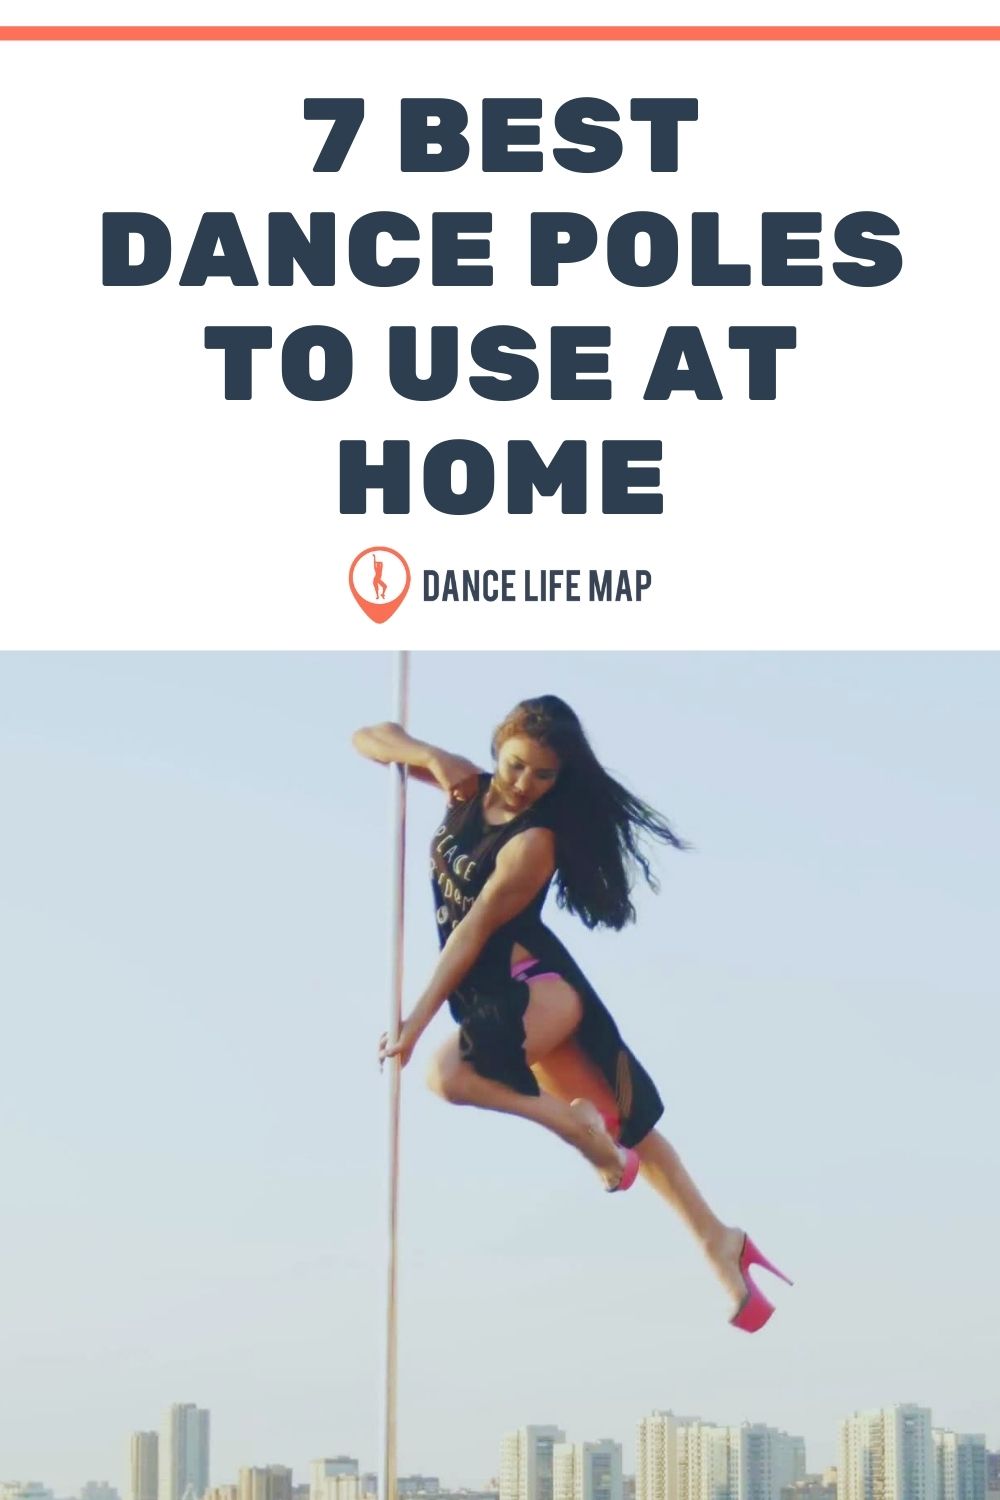 7 Best Dance Poles to Use at Home Pinterest